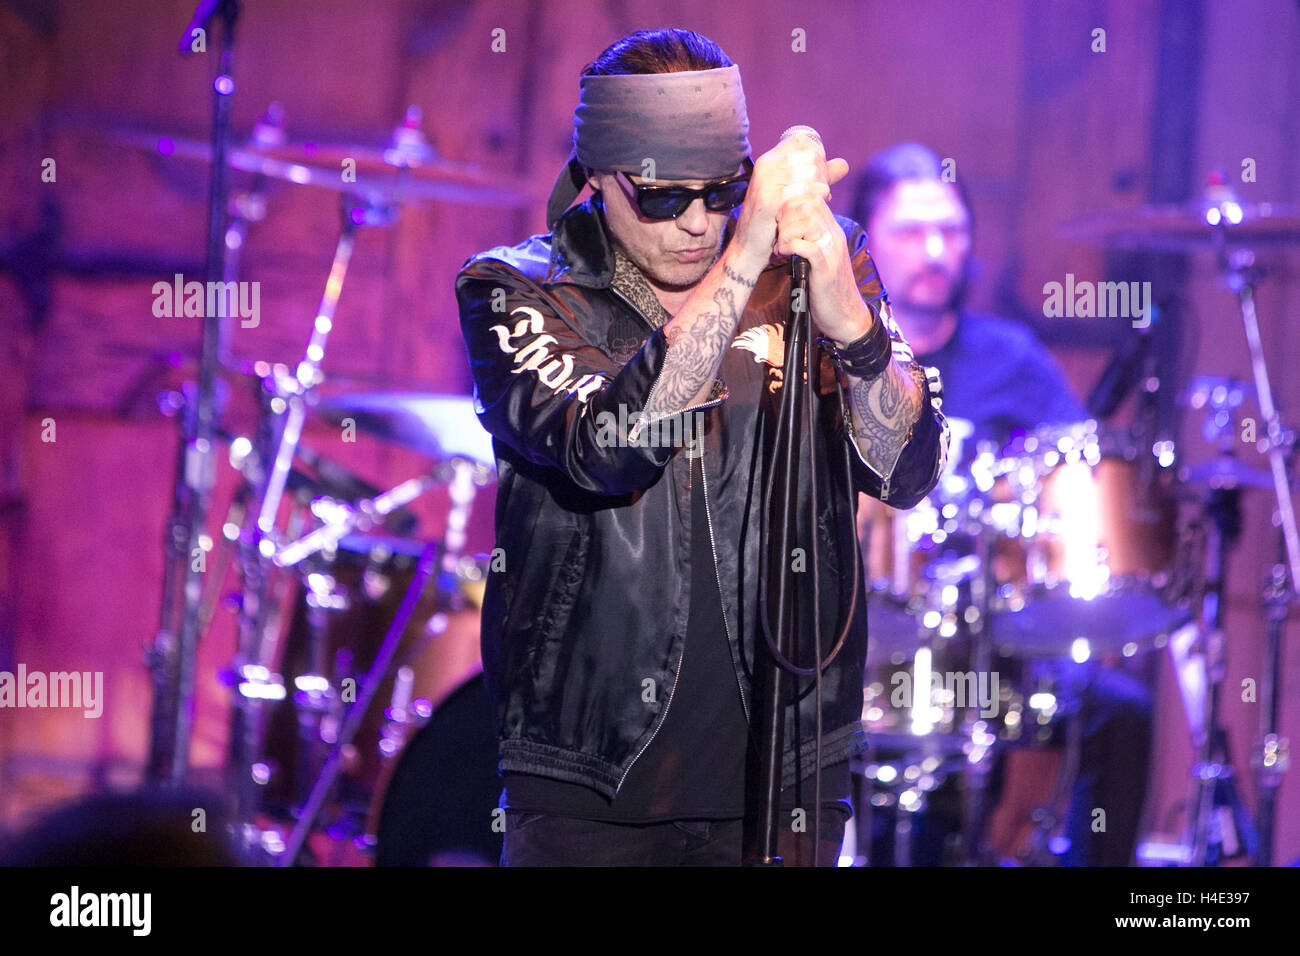 Ian Astbury of The Cult performs at the Mountin Winery on June 5, 2016 at the Mountain Winery in Sartoga, California. Stock Photo